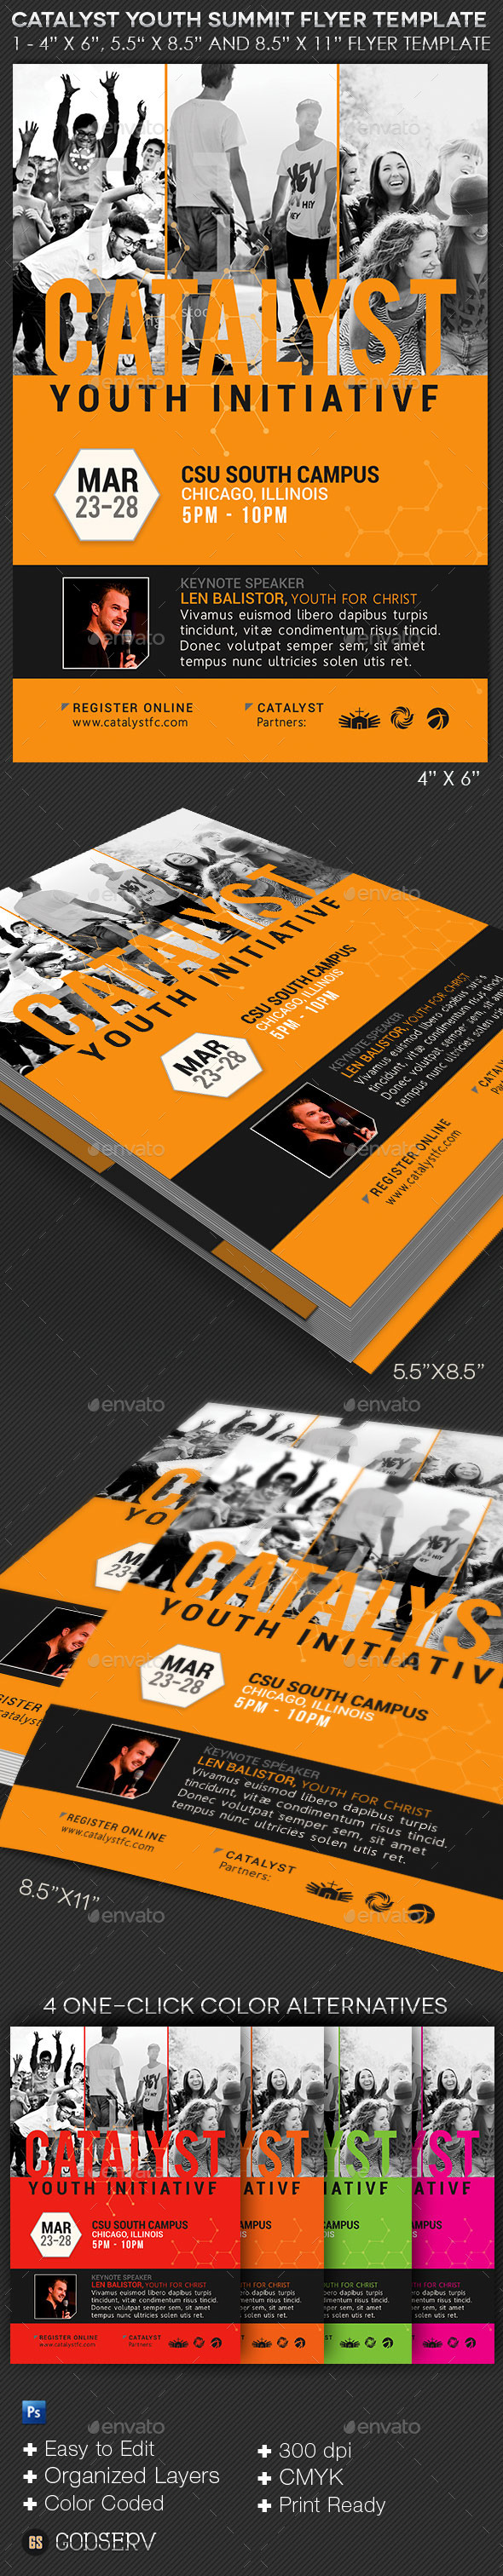 Catalyst Youth Summit Flyer Template (Church)